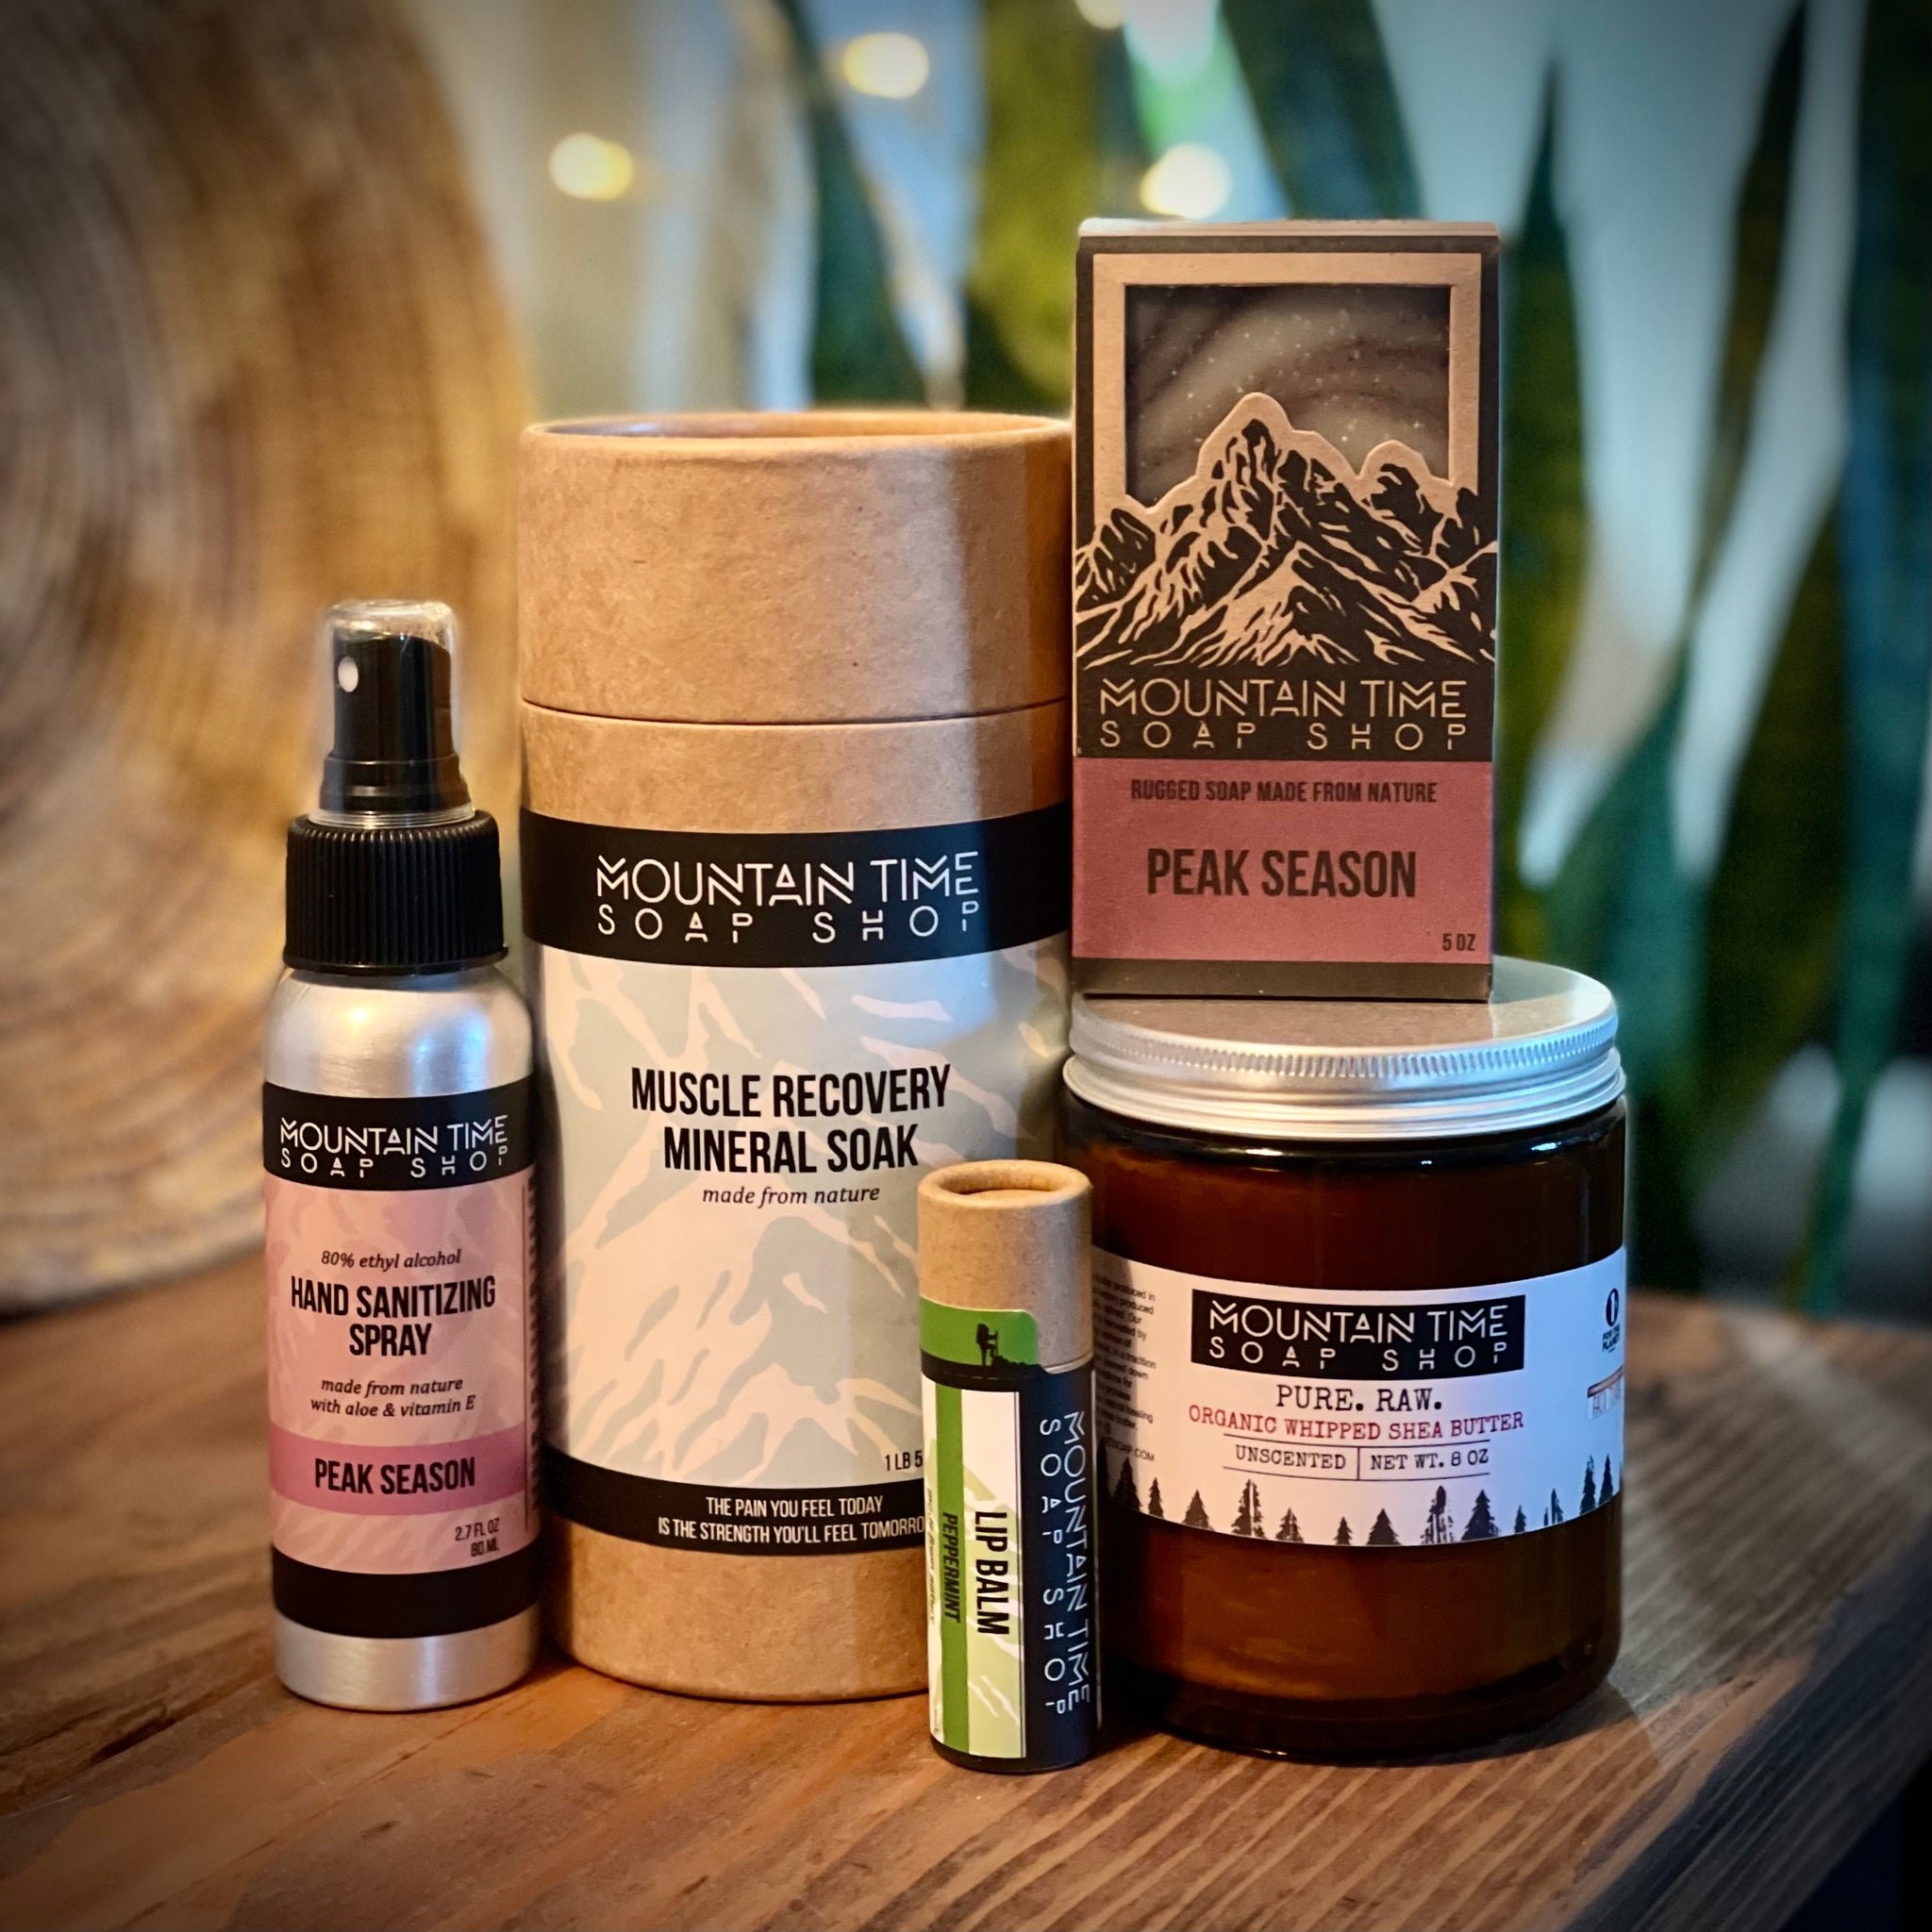 Mountain Time Essentials Gift Box, $46